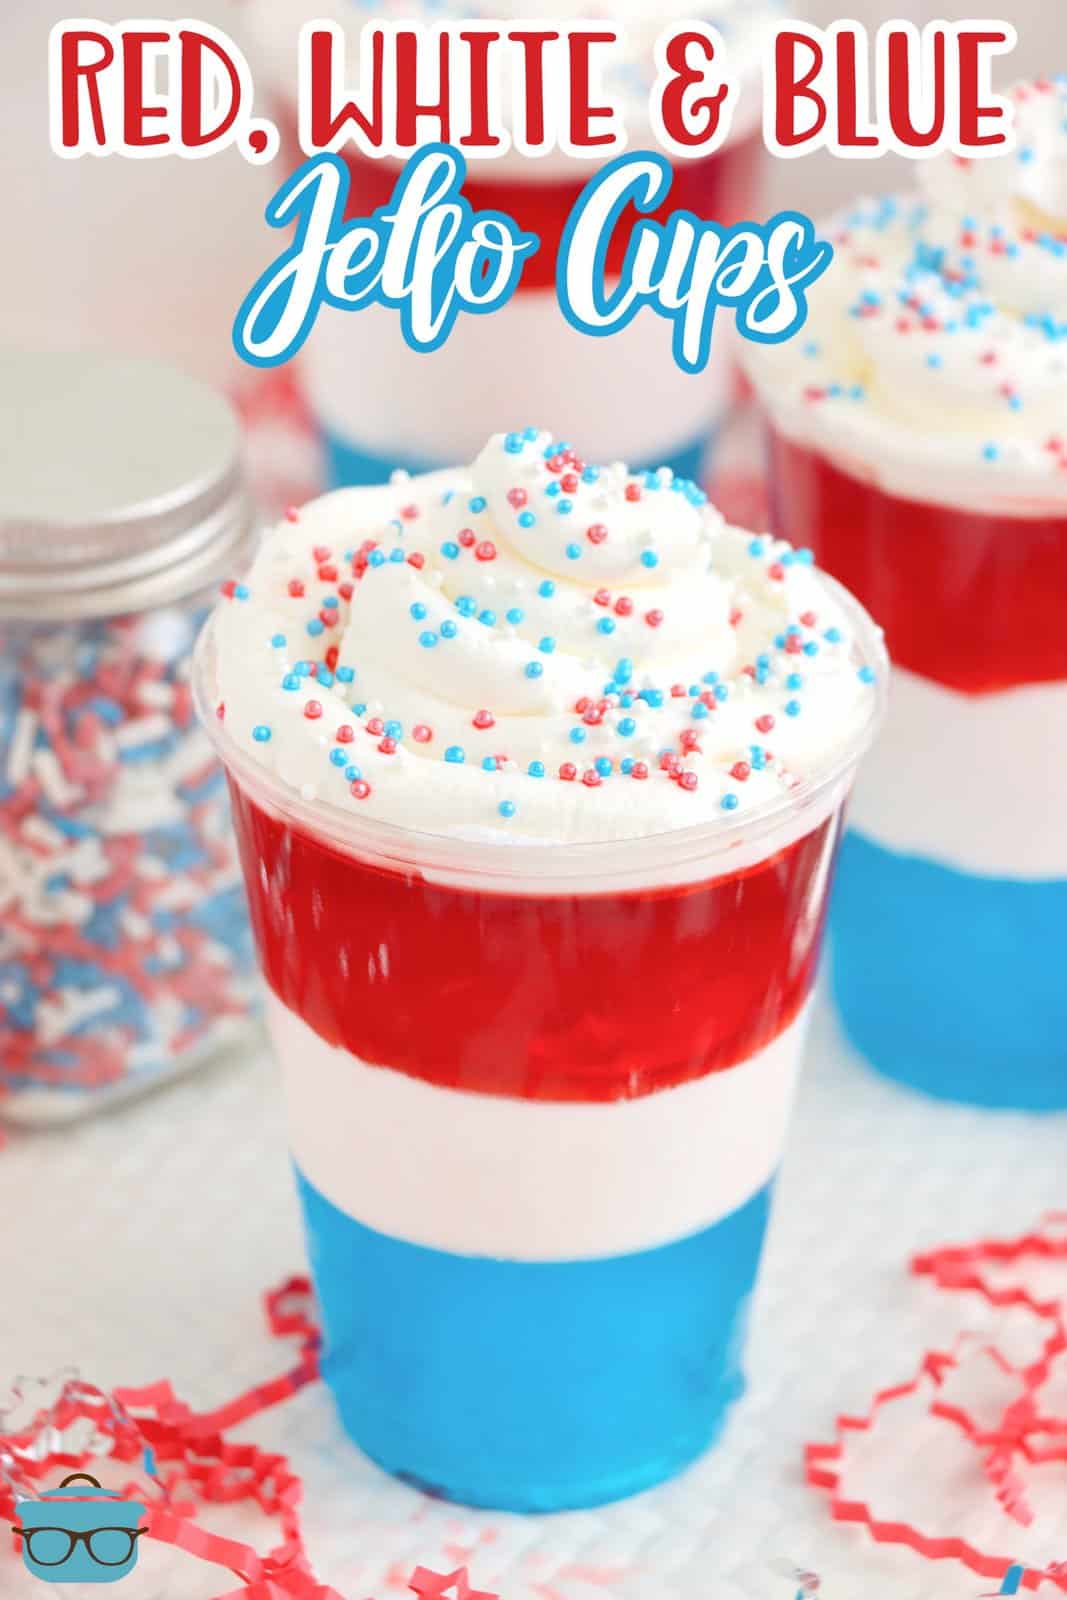 Red, white and blue Jell-o Cups with whipped cream on top.